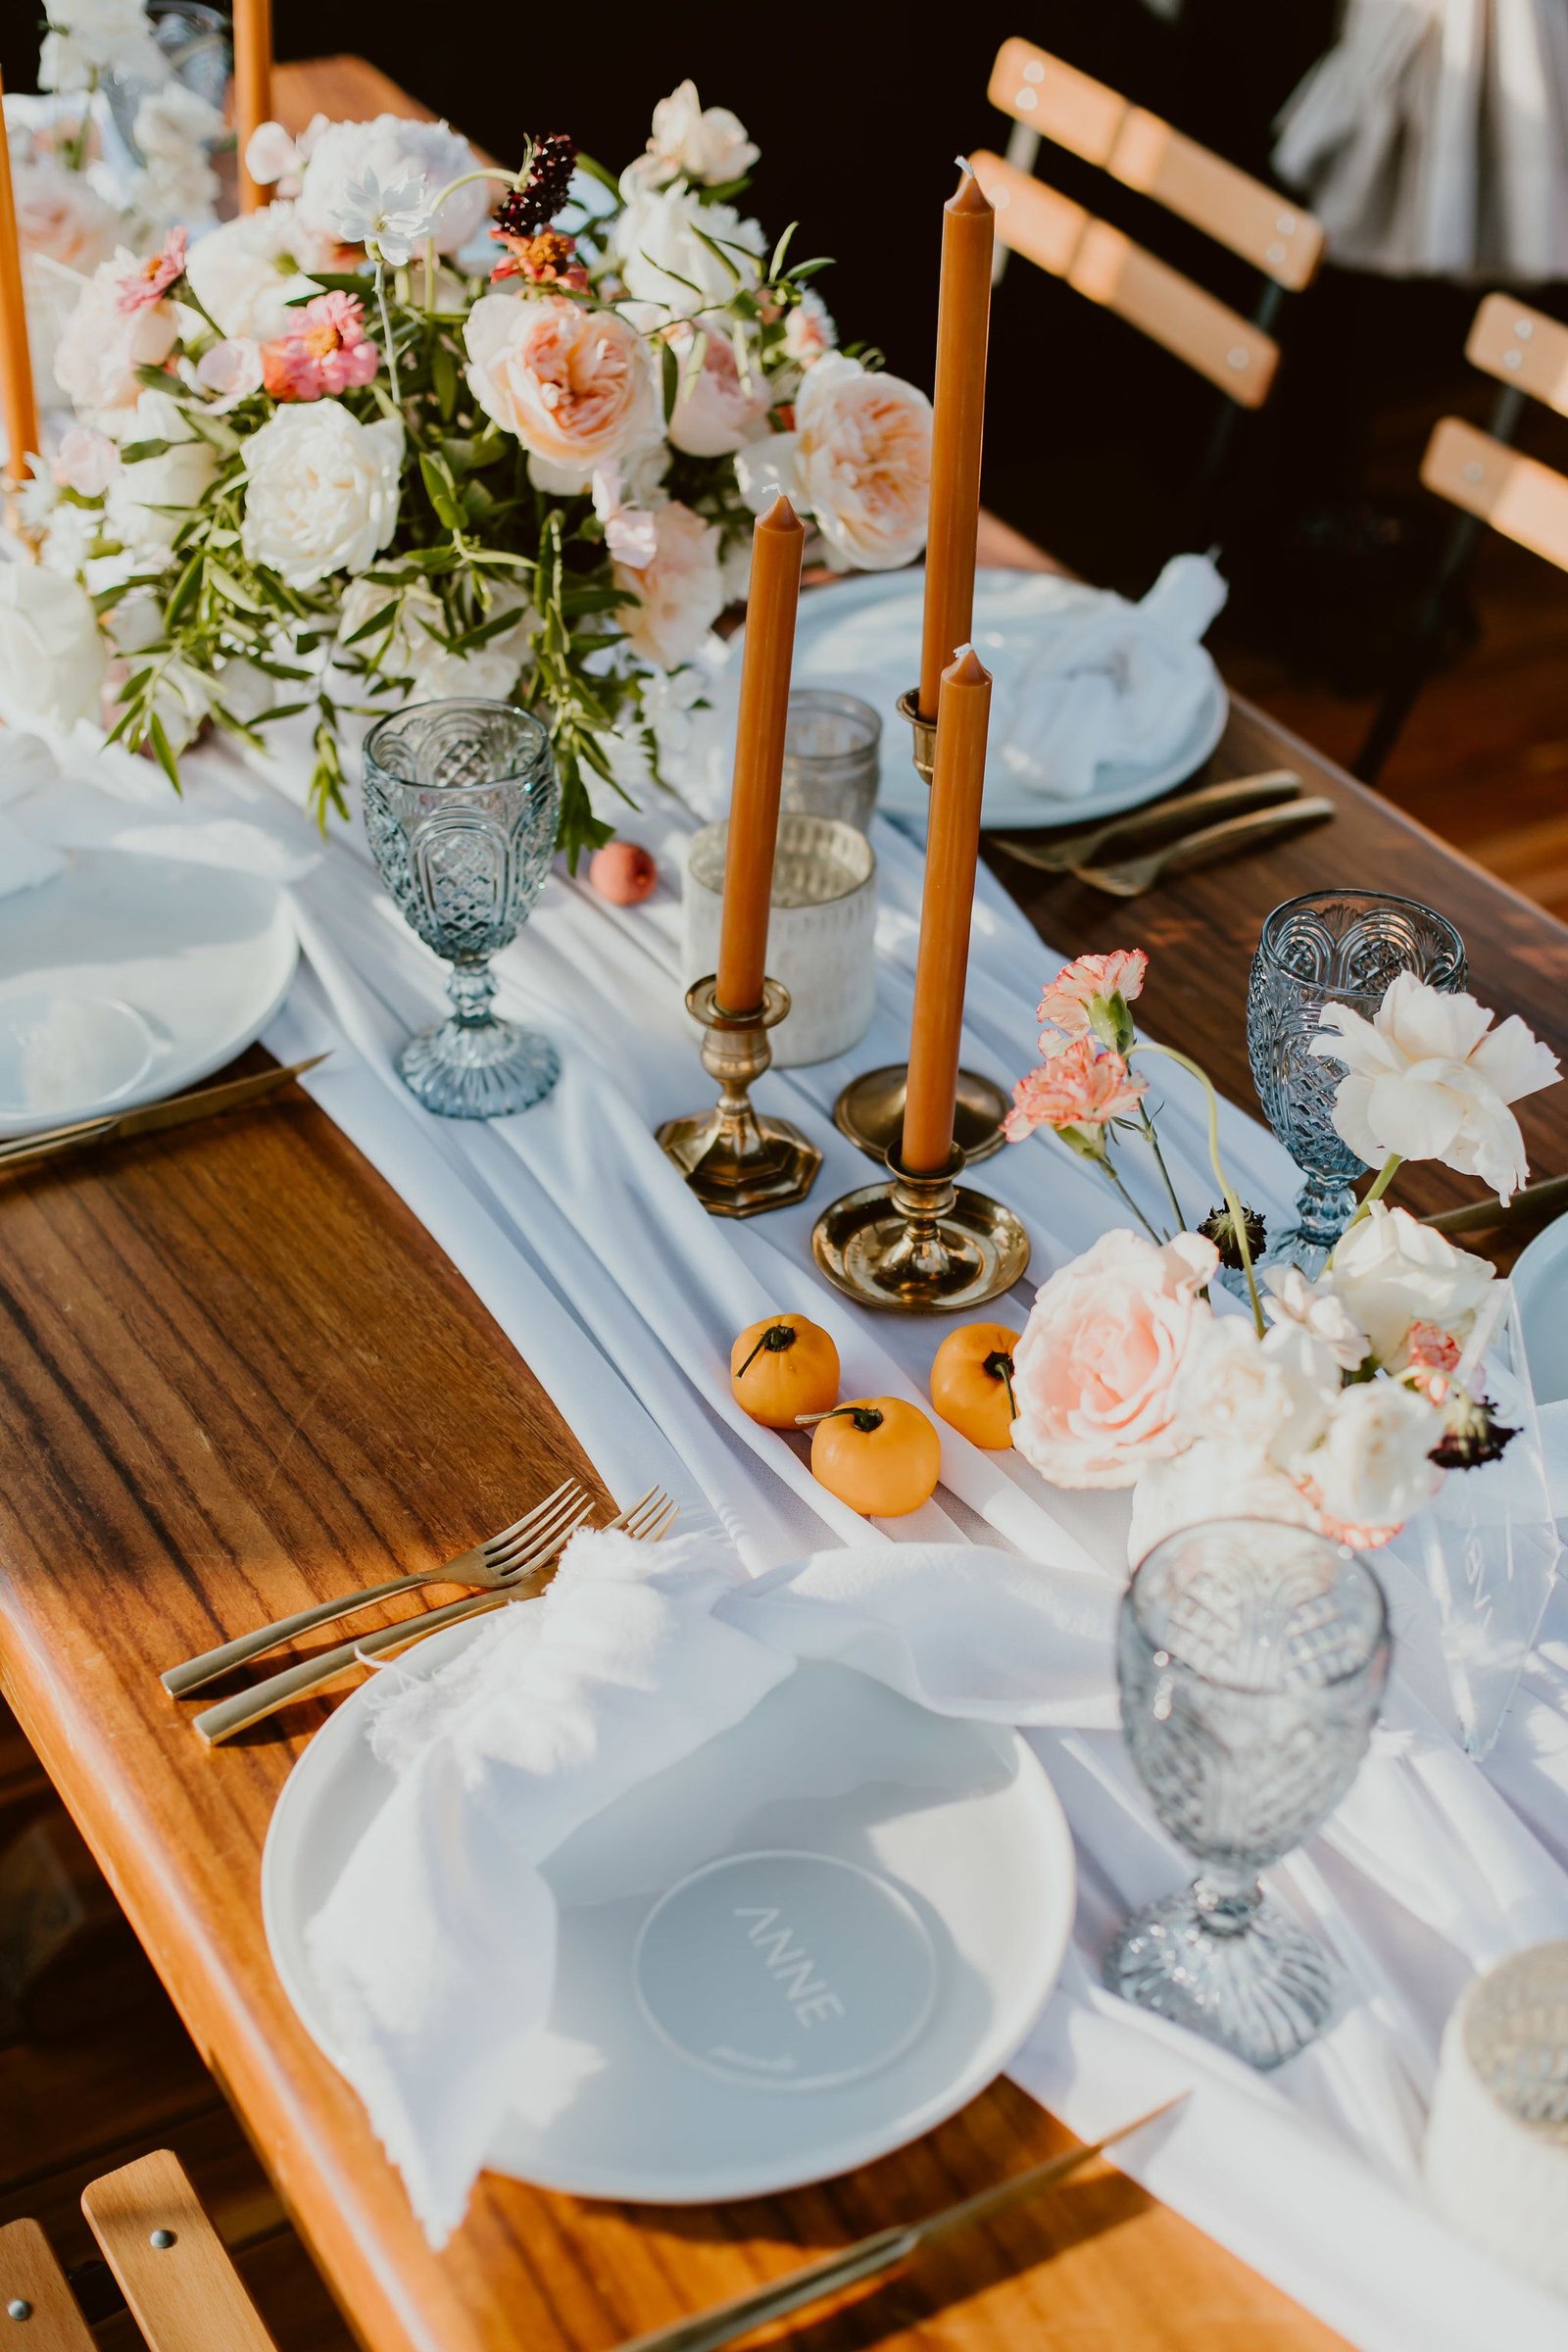 Beautiful table setup with white chargers, white napkins and beautiful table runners. There were brown candle sticks to match the papayas and beautiful wood tables to match. Candles and Flower centerpieces throughout the tables made it look full but still clean.